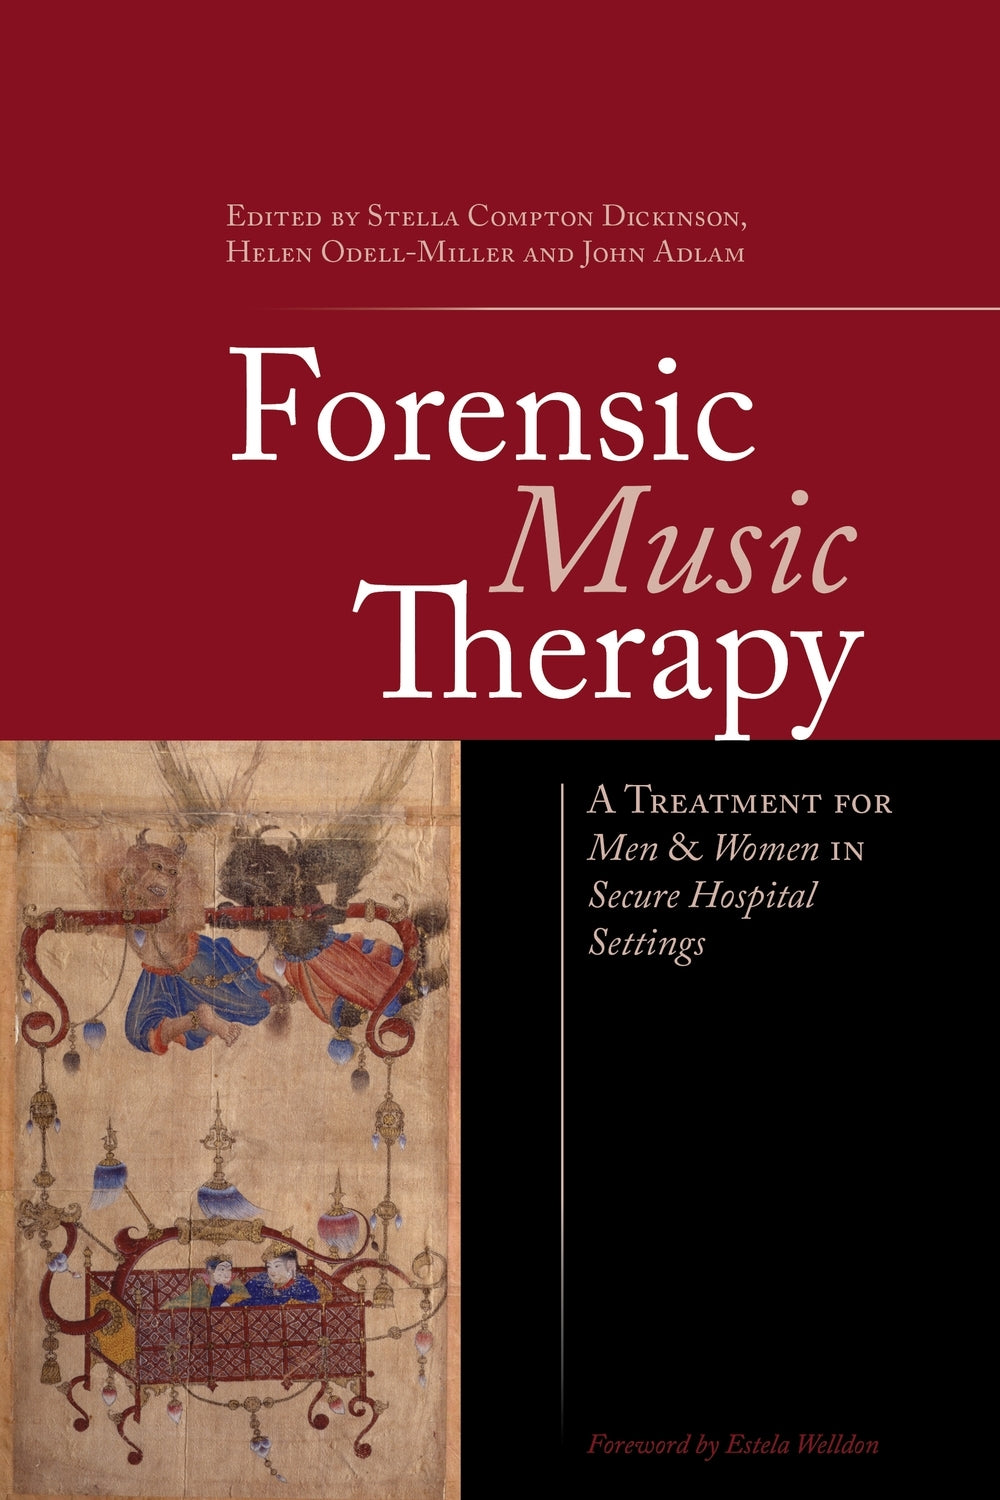 Forensic Music Therapy by John Adlam, John Adlam, Helen Odell-Miller, Stella Compton-Dickinson, Estela Welldon, No Author Listed